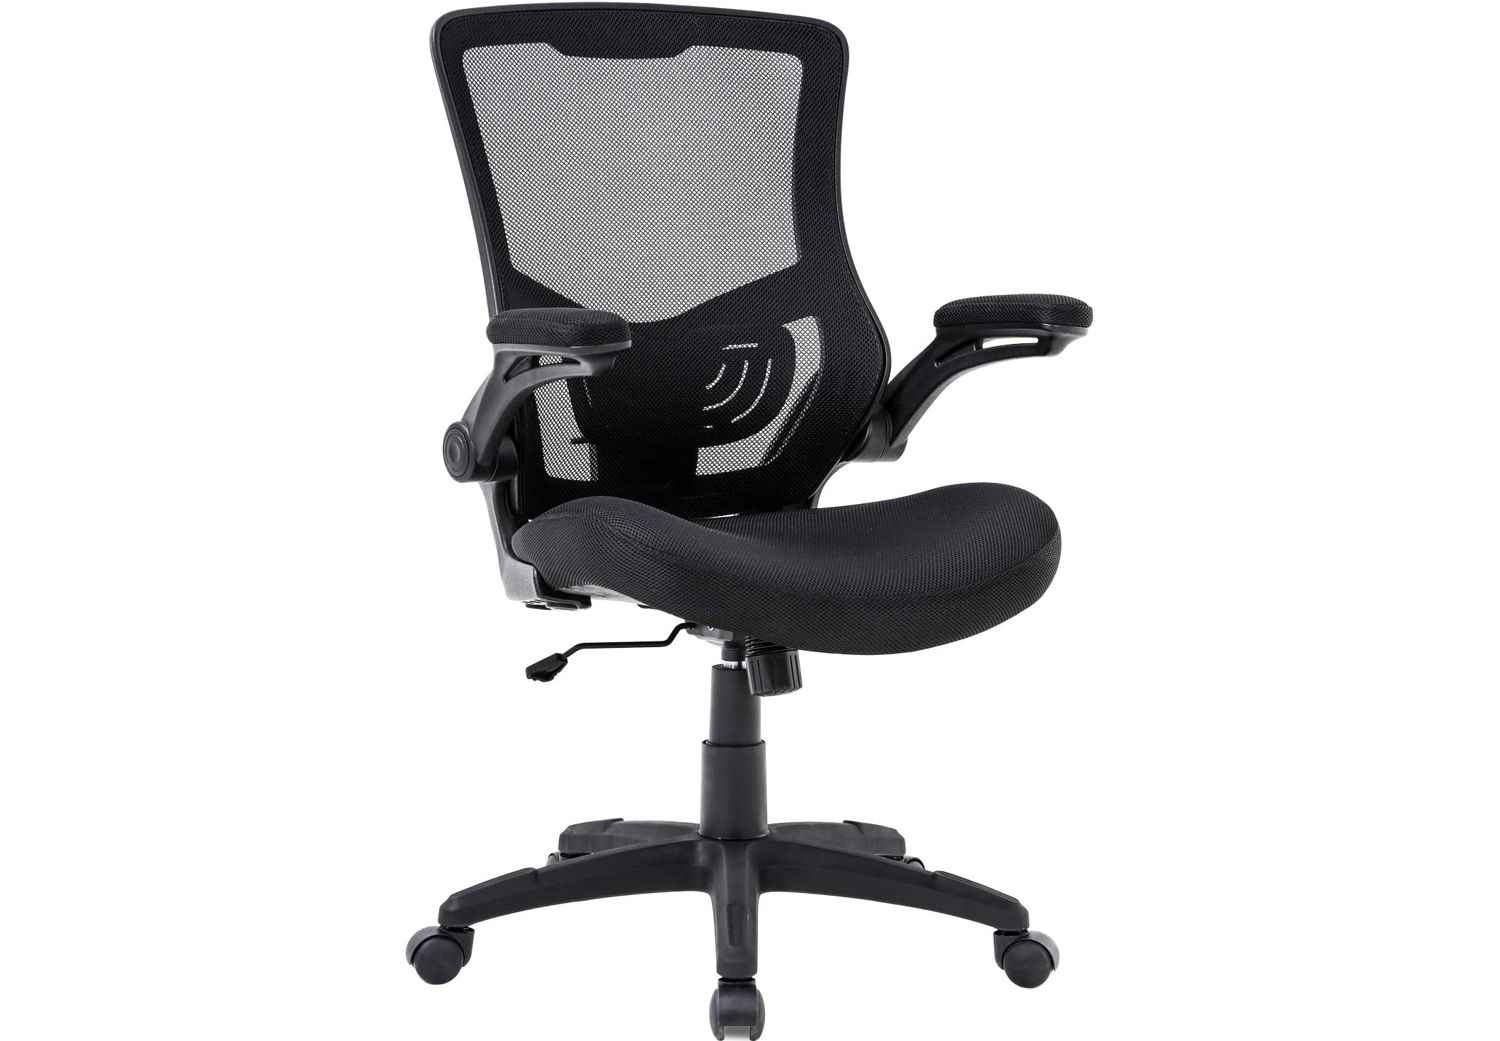 The NetDigz Editors rate the Kovalenthor FD-21-DF-314 as the Best Budget Desk Chair.